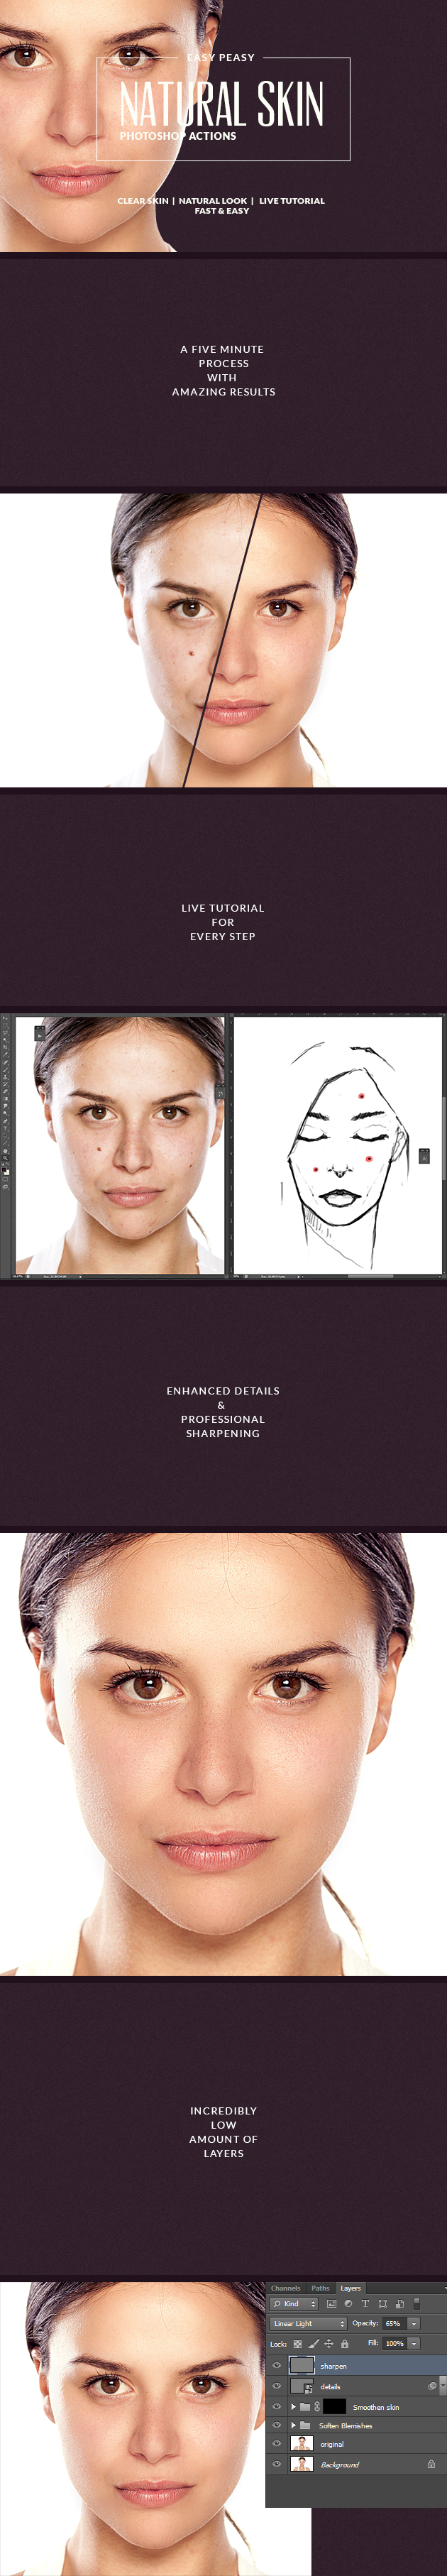 Get Flawless Skin with these Revolutionary Natural Skin PS Actions - Blog Lorelei Web Design